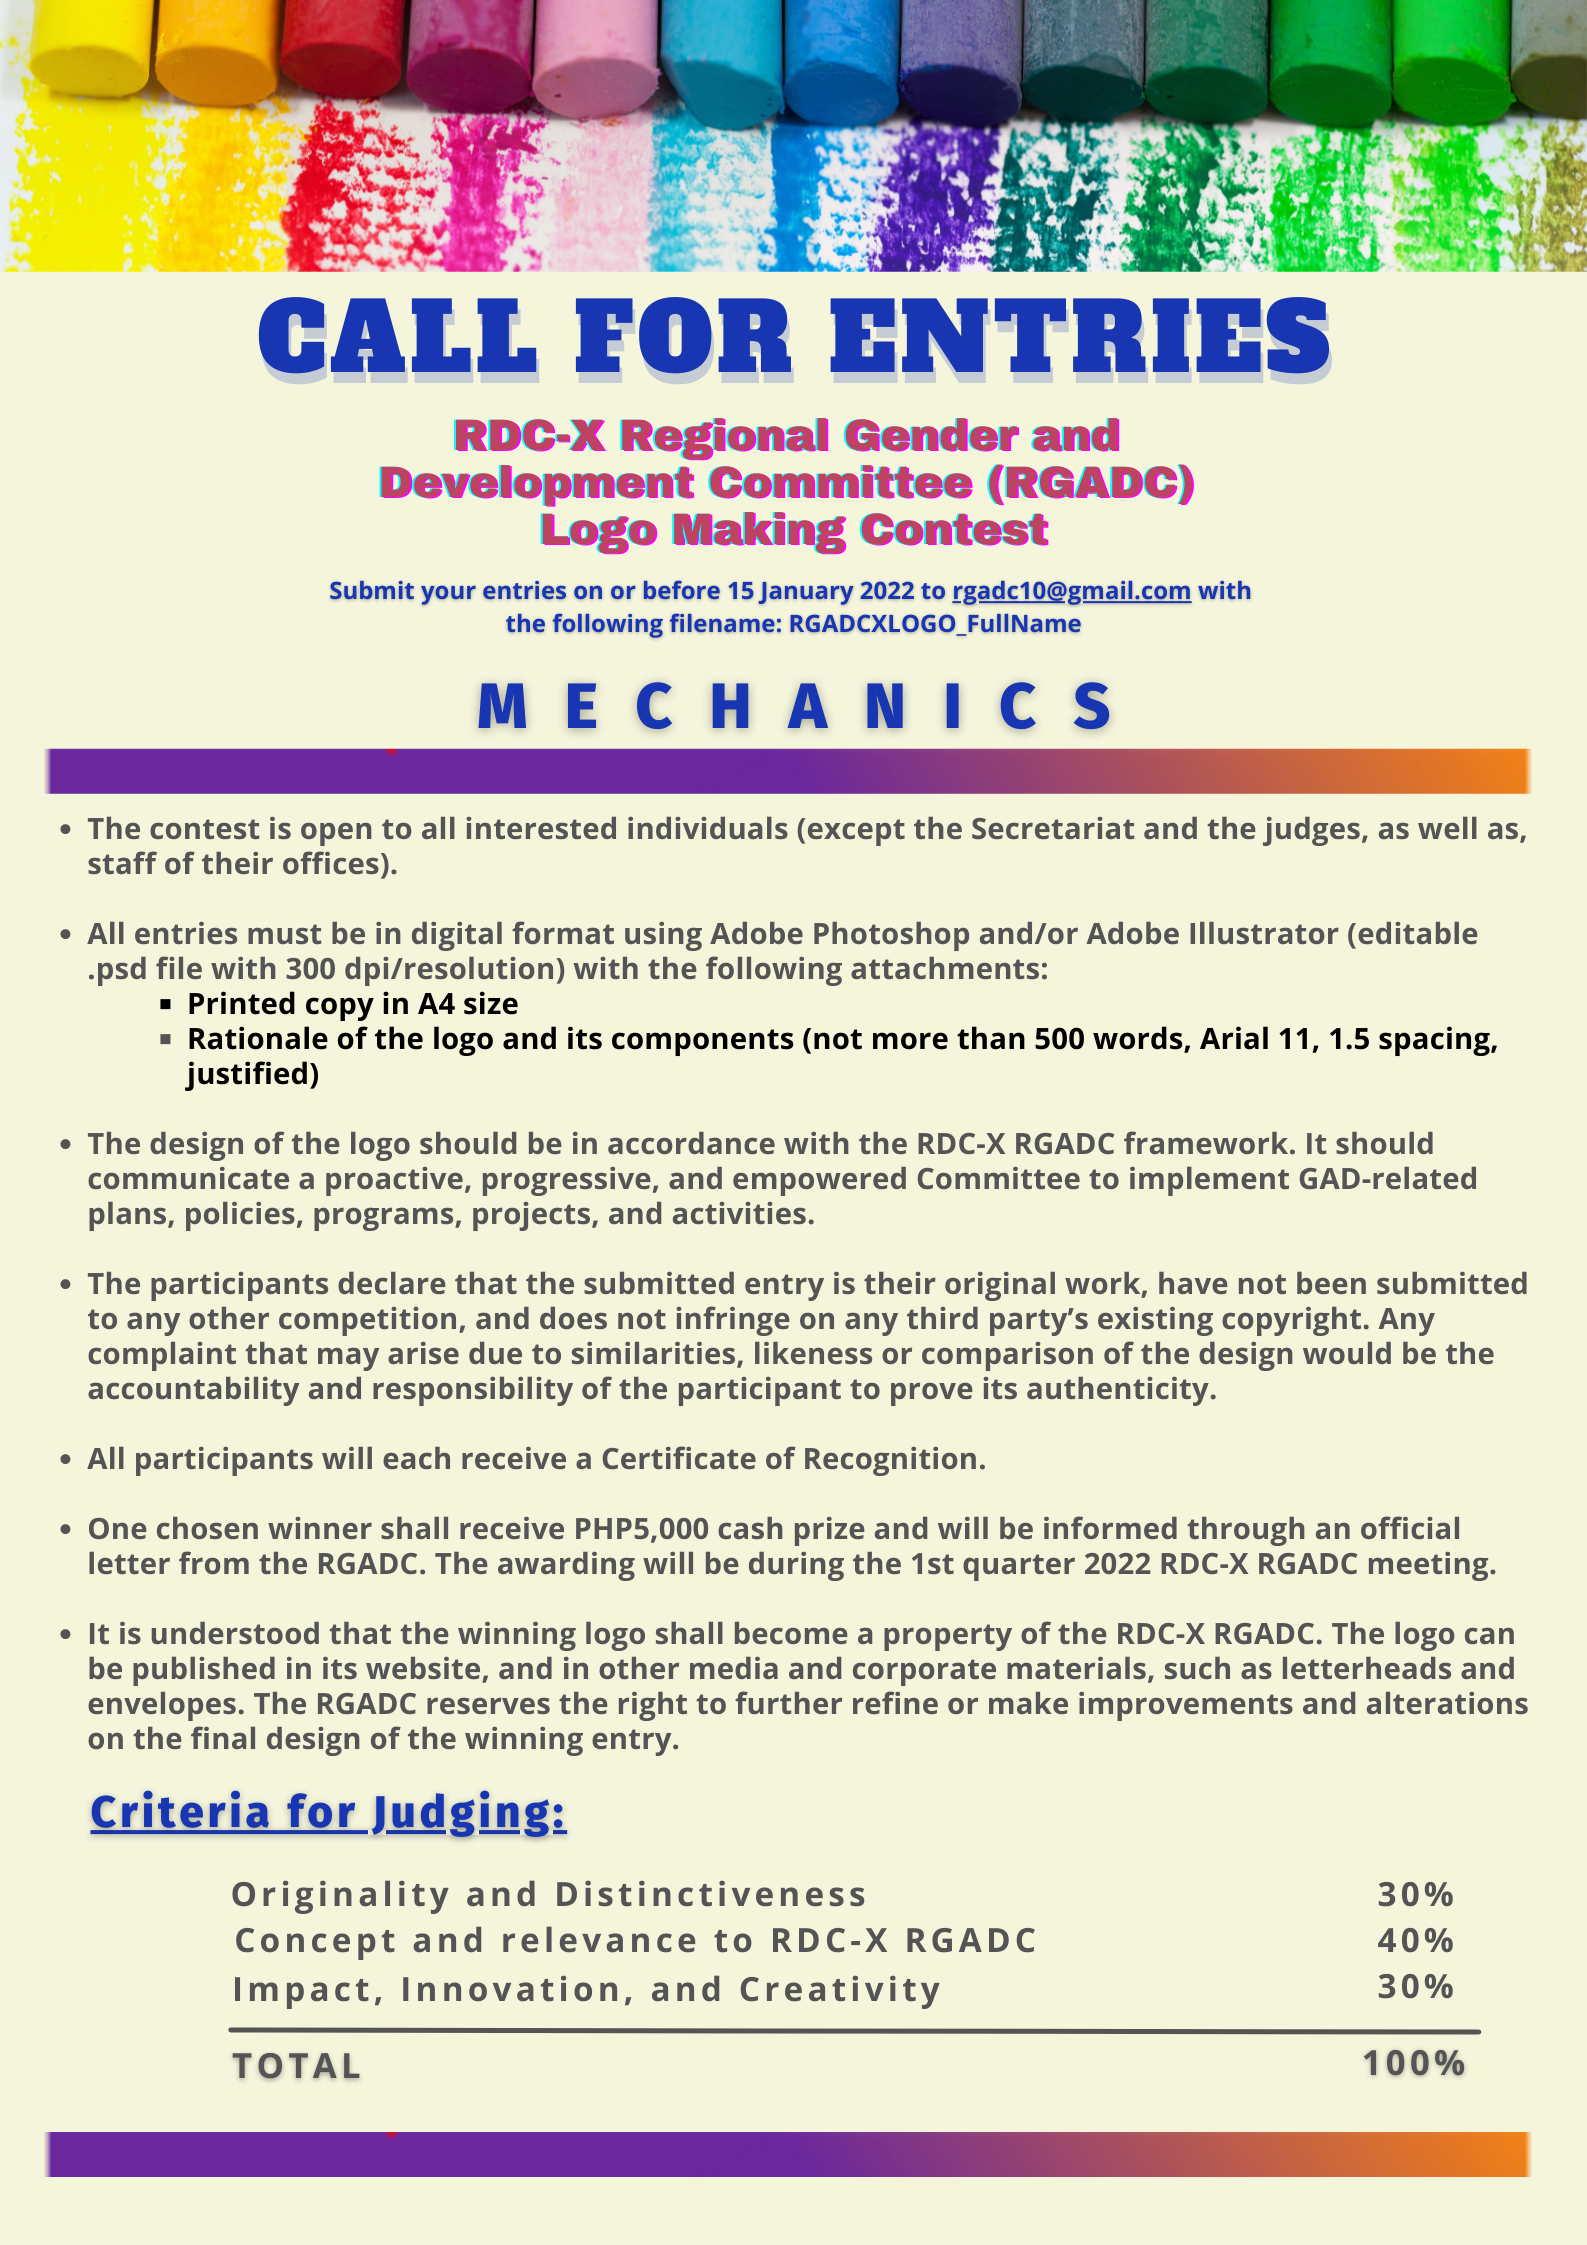 Call for Entries